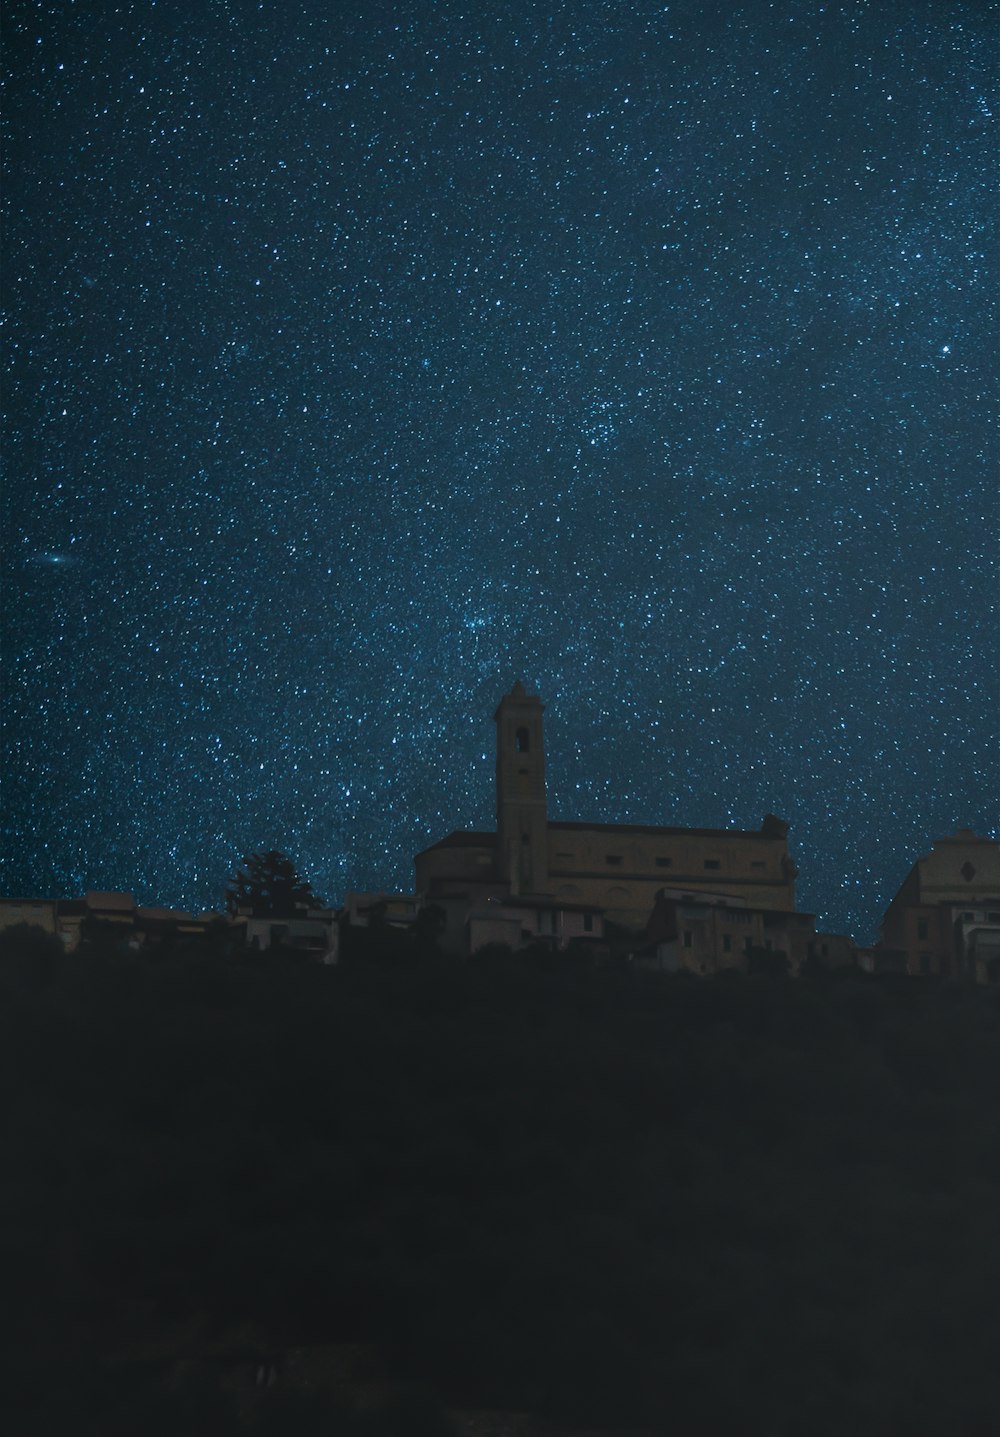 low-angle photography of church under a starry night sky